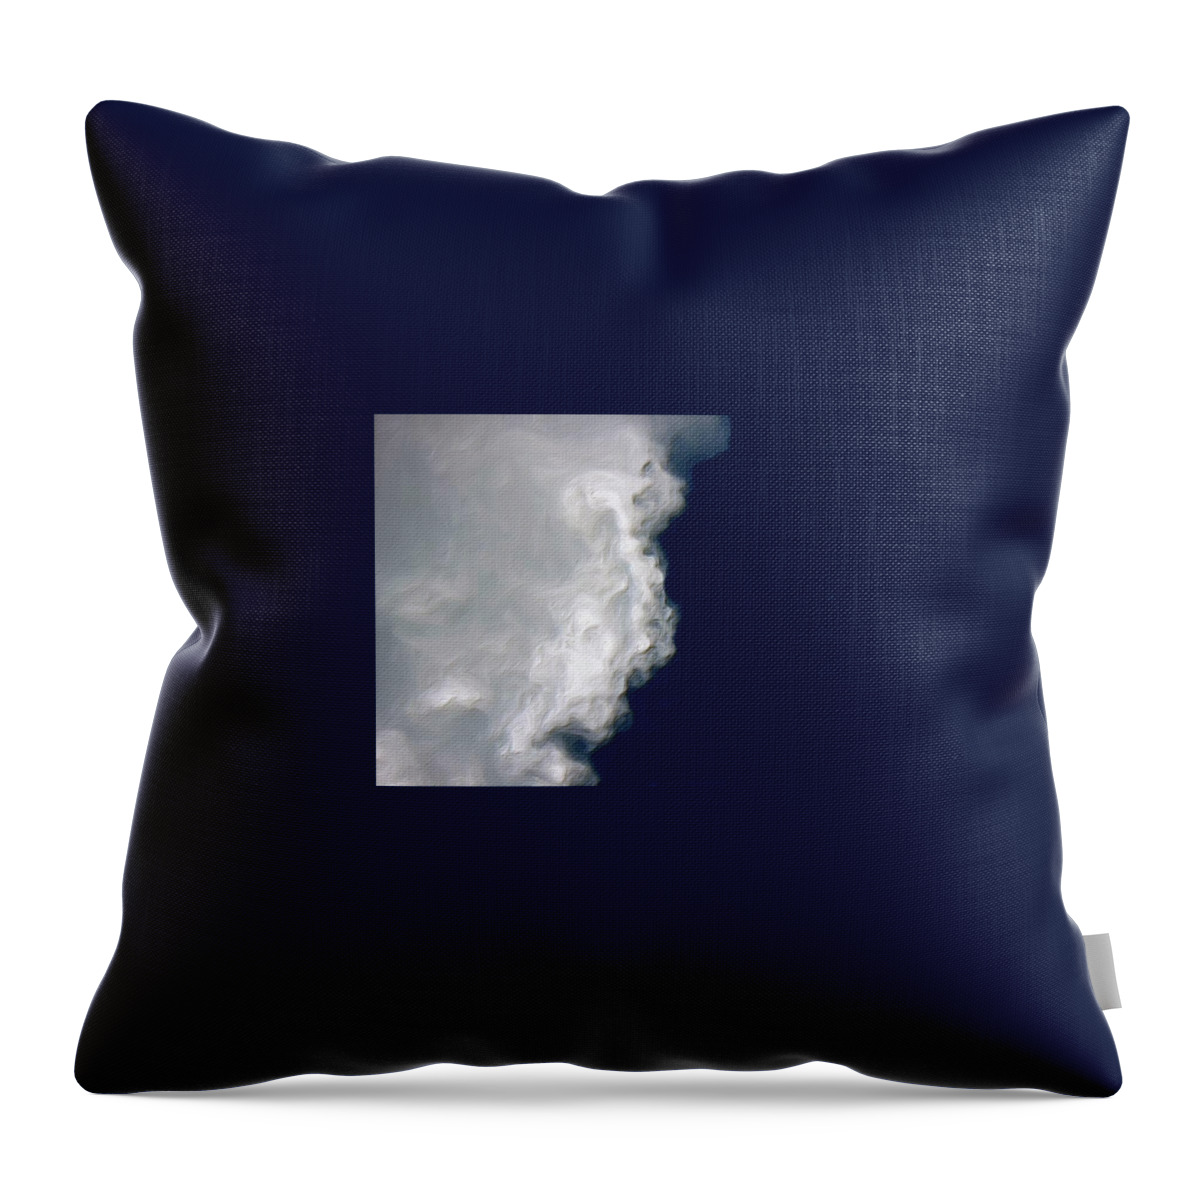  Throw Pillow featuring the digital art The Heavy Cloud by Rein Nomm